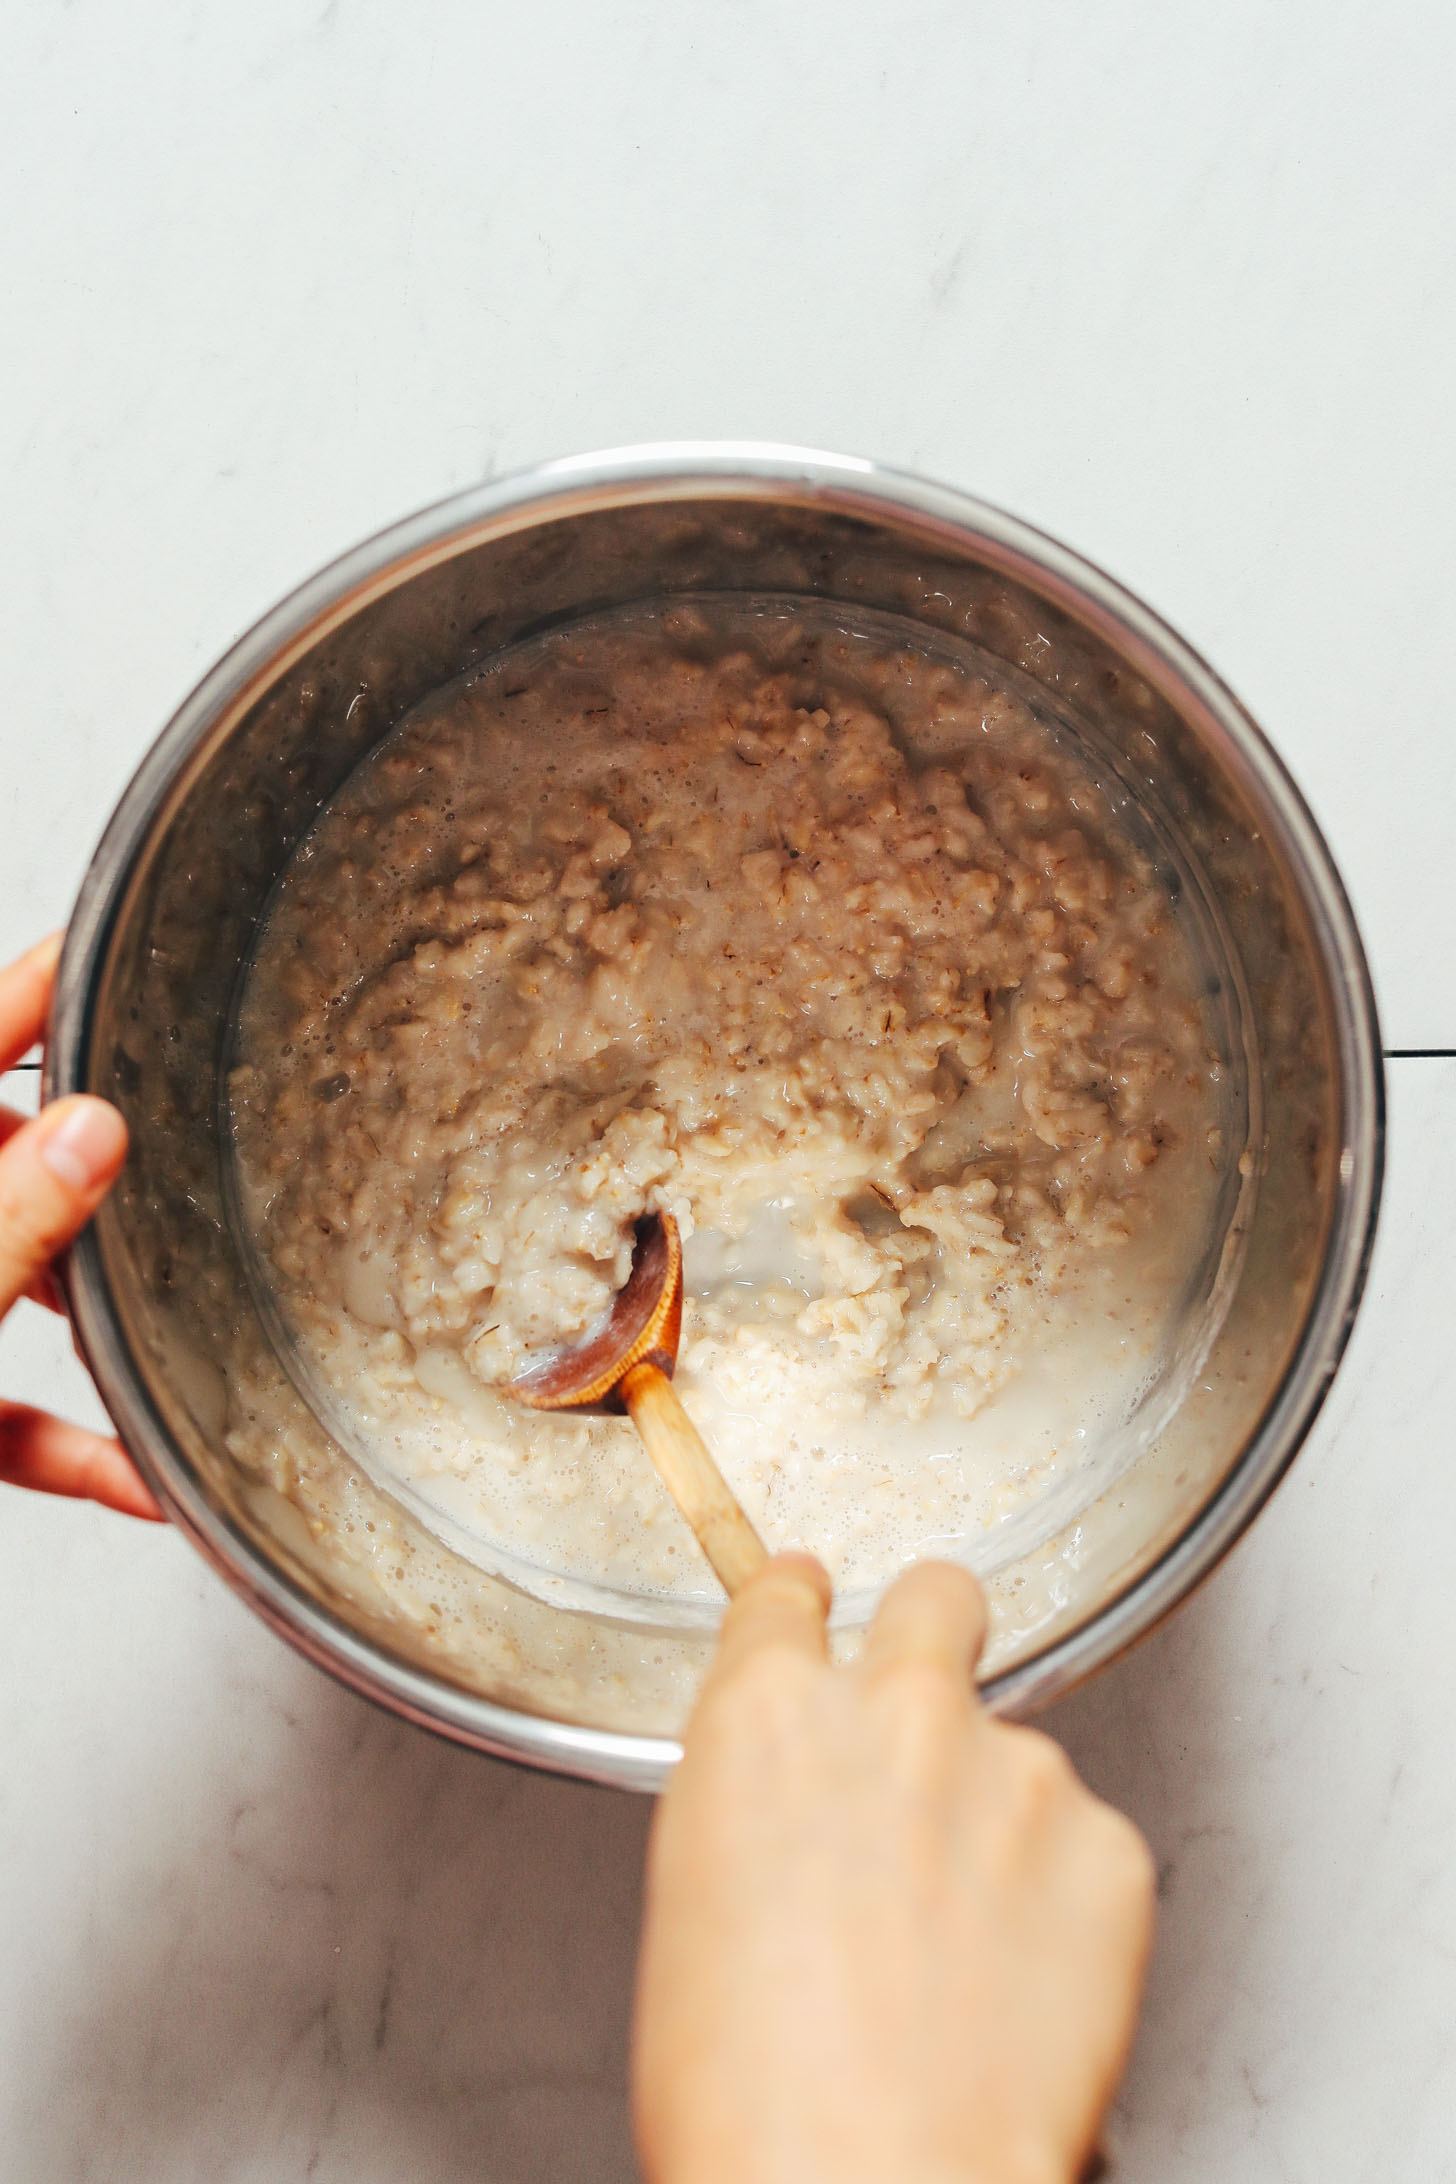 Stirring cooked oats in the Instant Pot